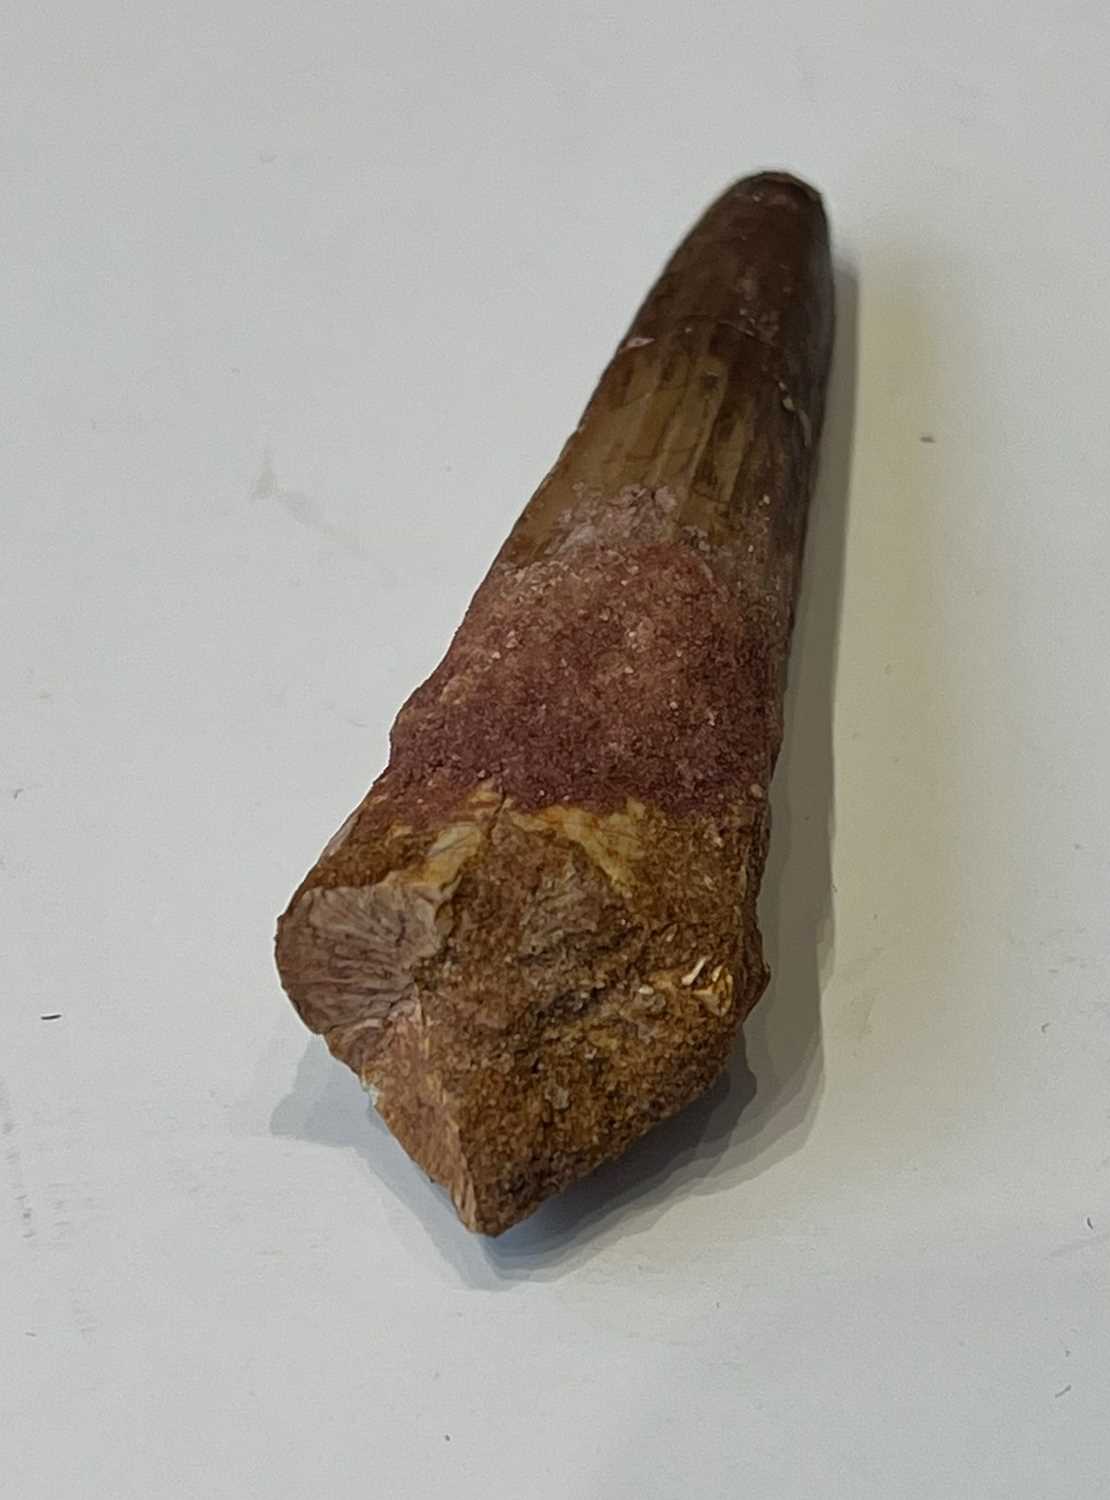 AN EXTINCT ‘SPINOSAURUS’ DINOSAUR TOOTH, LATE CRETACEOUS, 100 MILLION YEARS OLD - Image 4 of 5